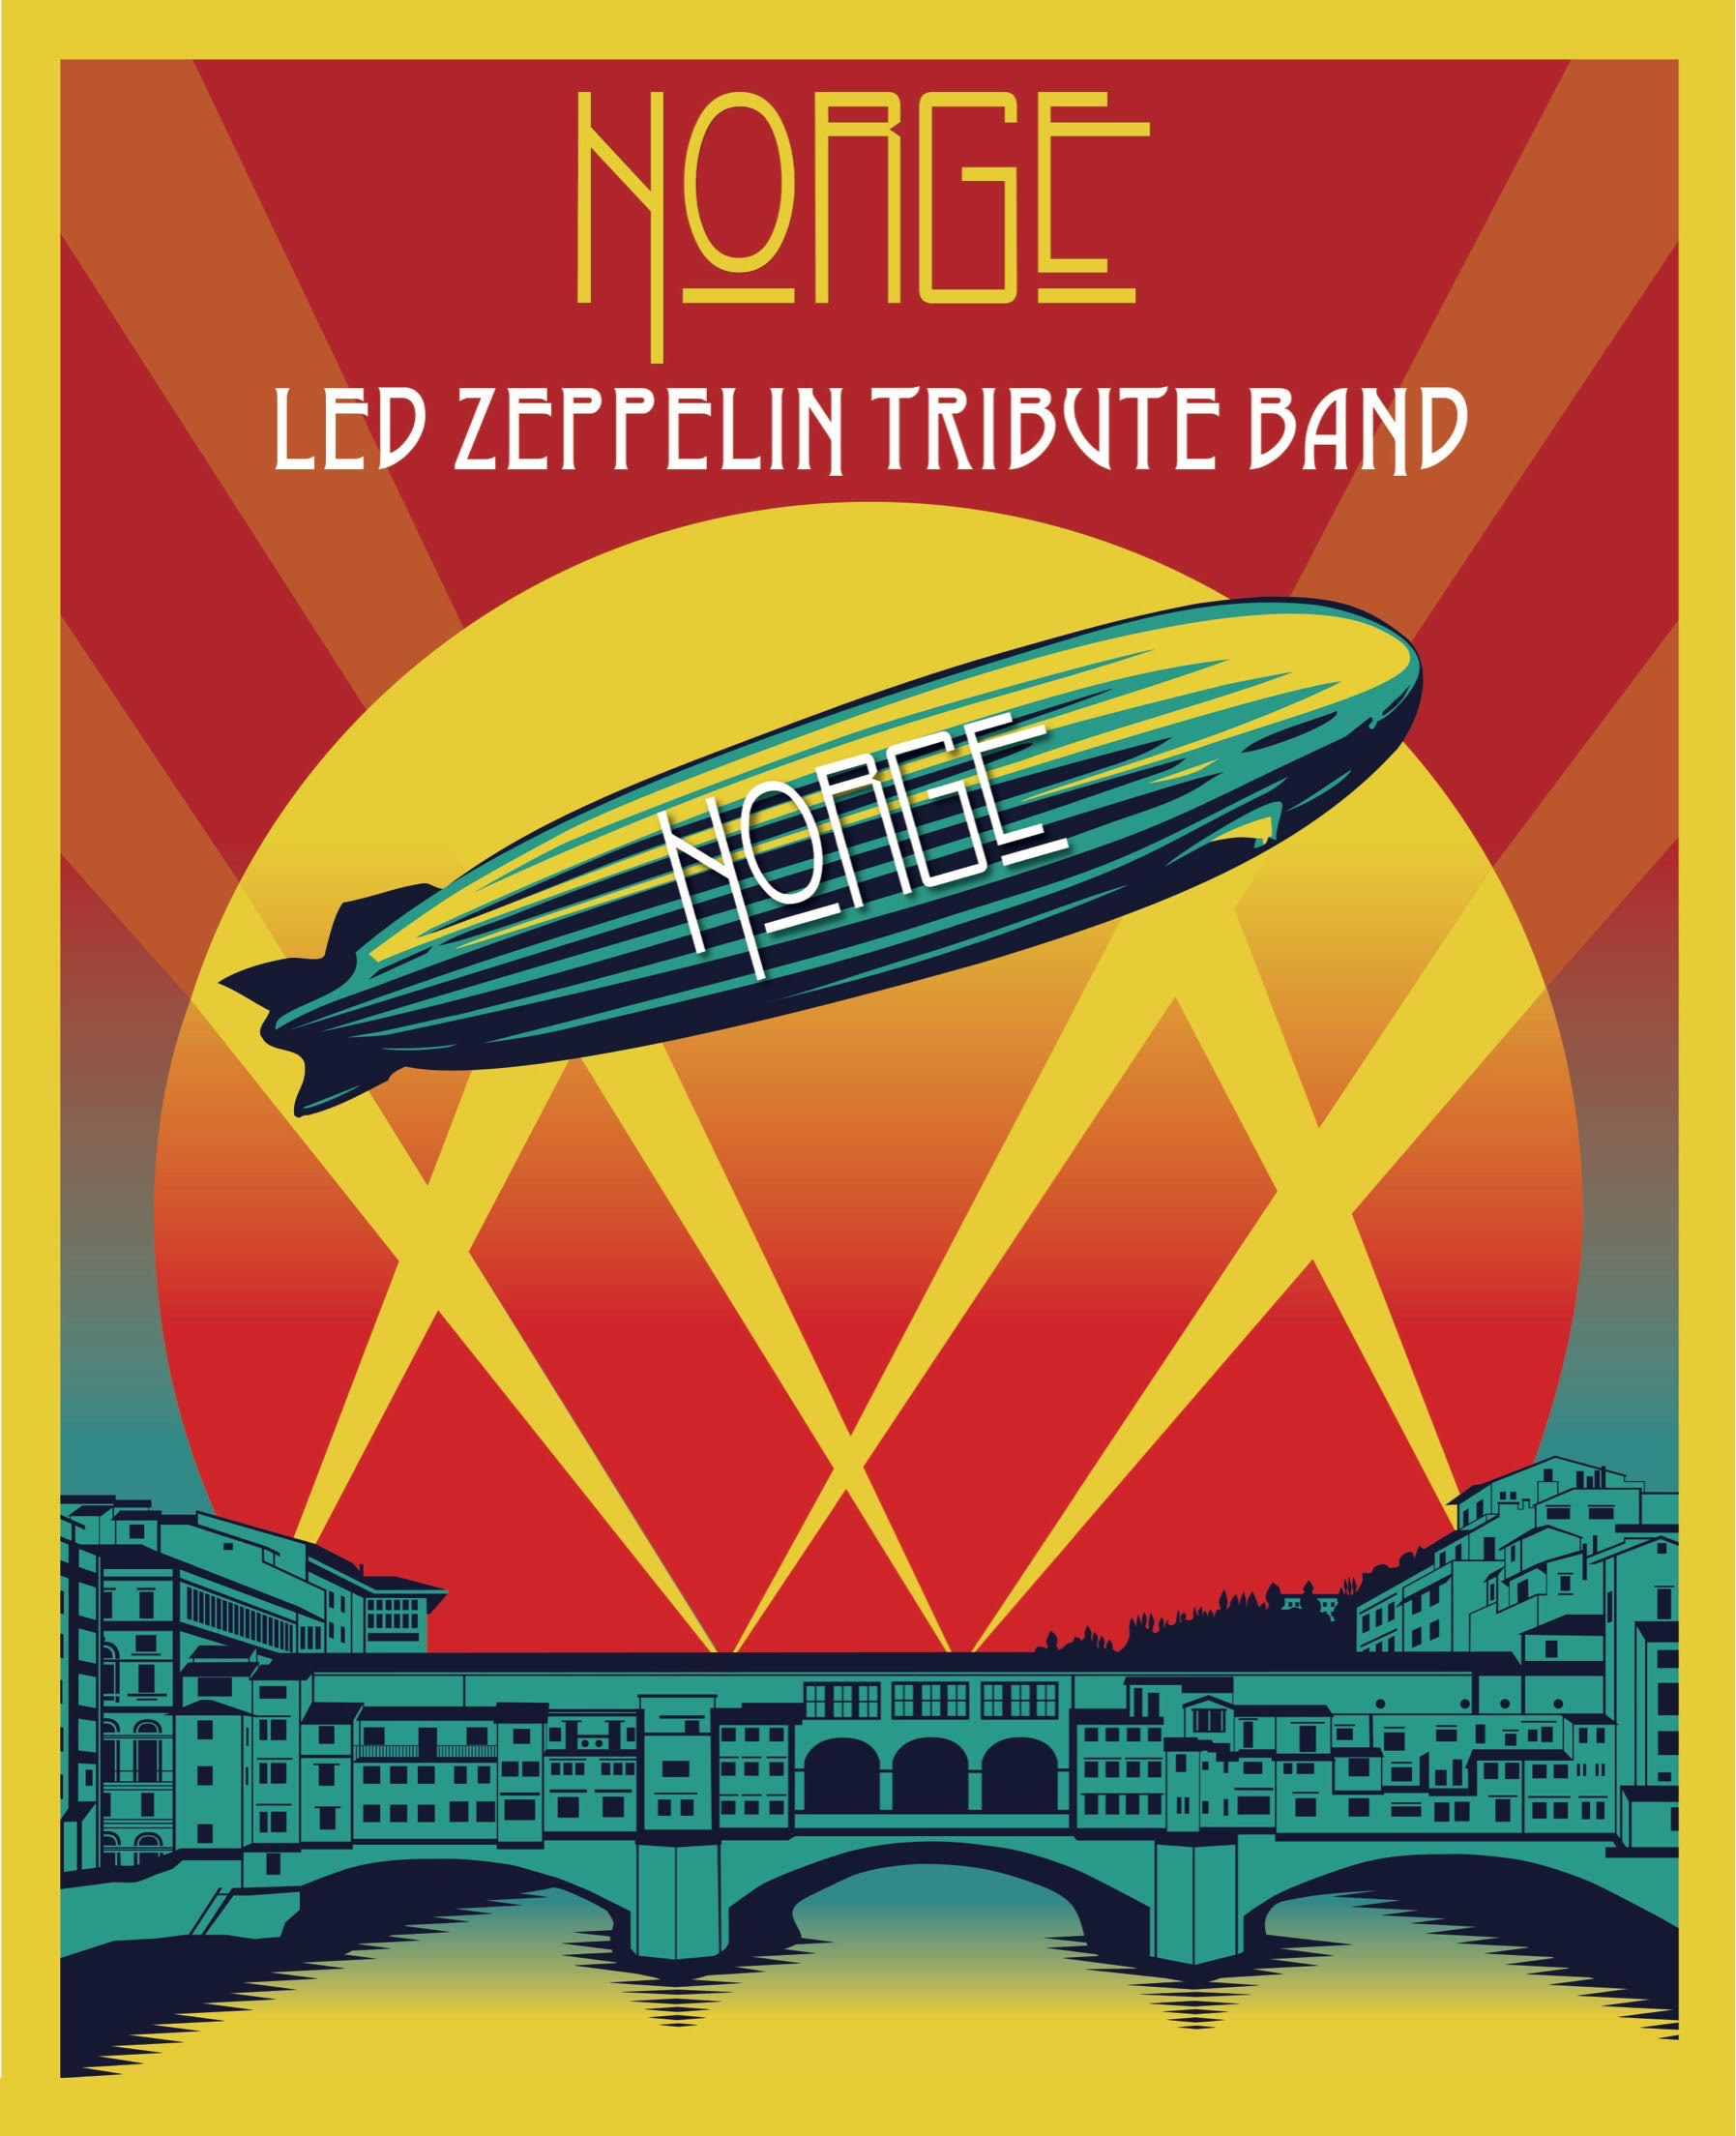 NORGE<br>LED ZEPPELIN TRIBUTE BAND